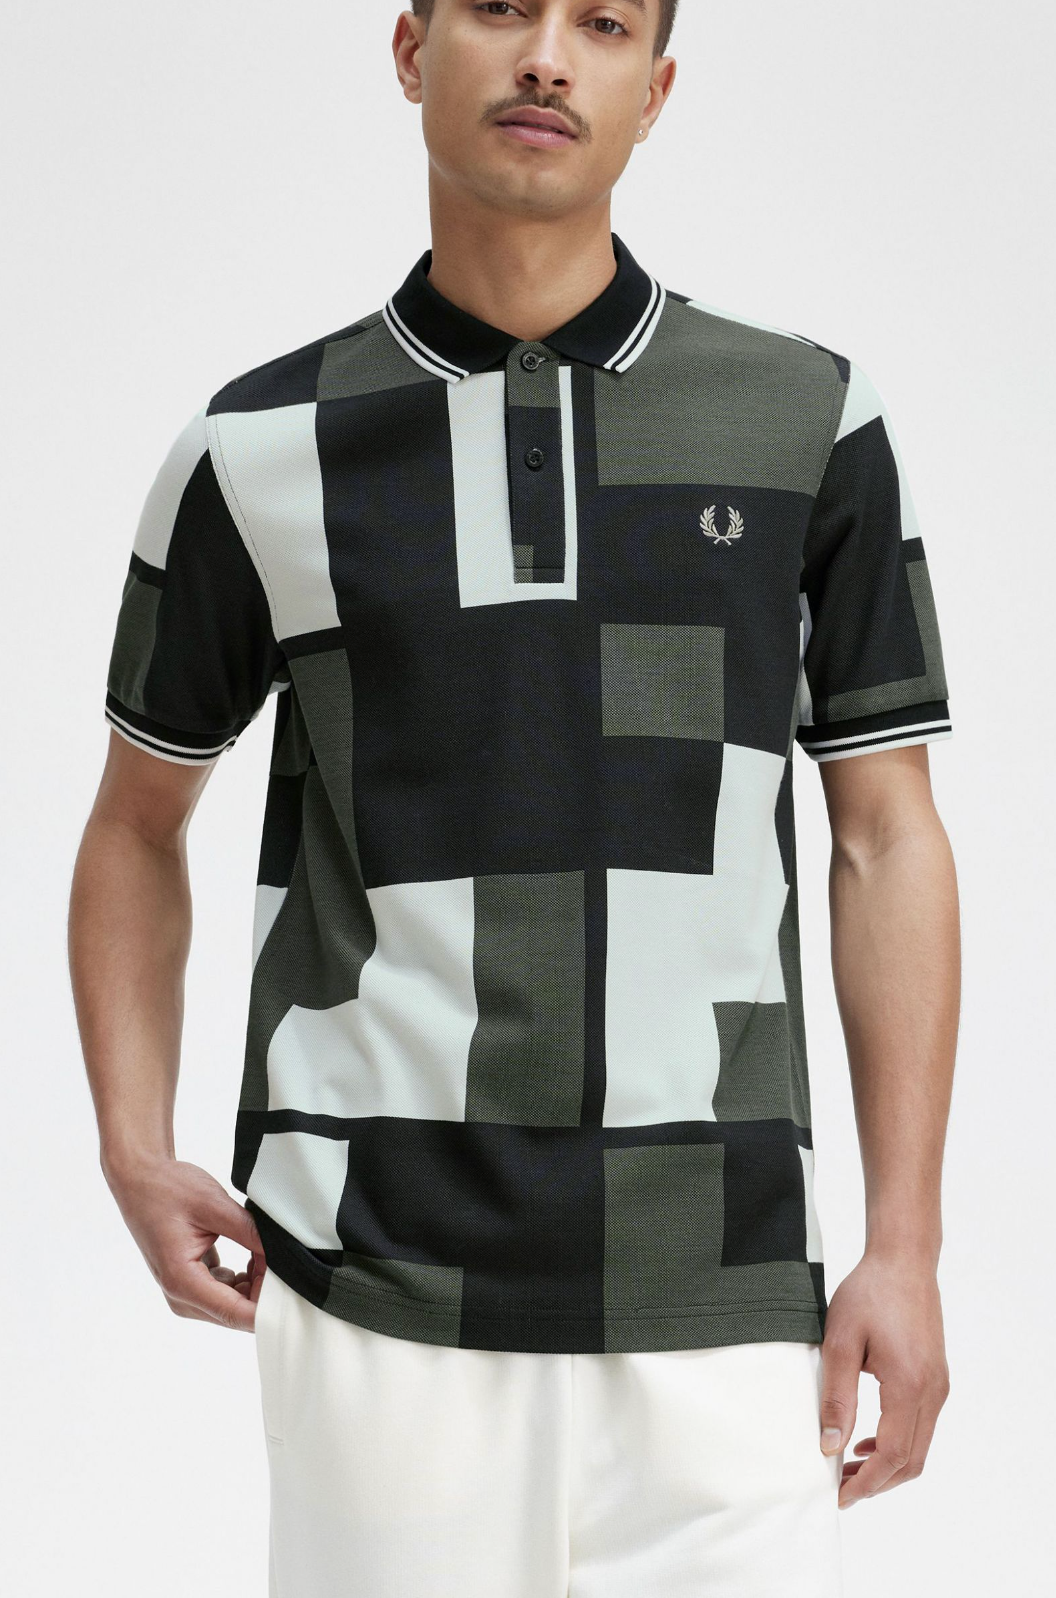 Pixel Print Fred Perry Shirt